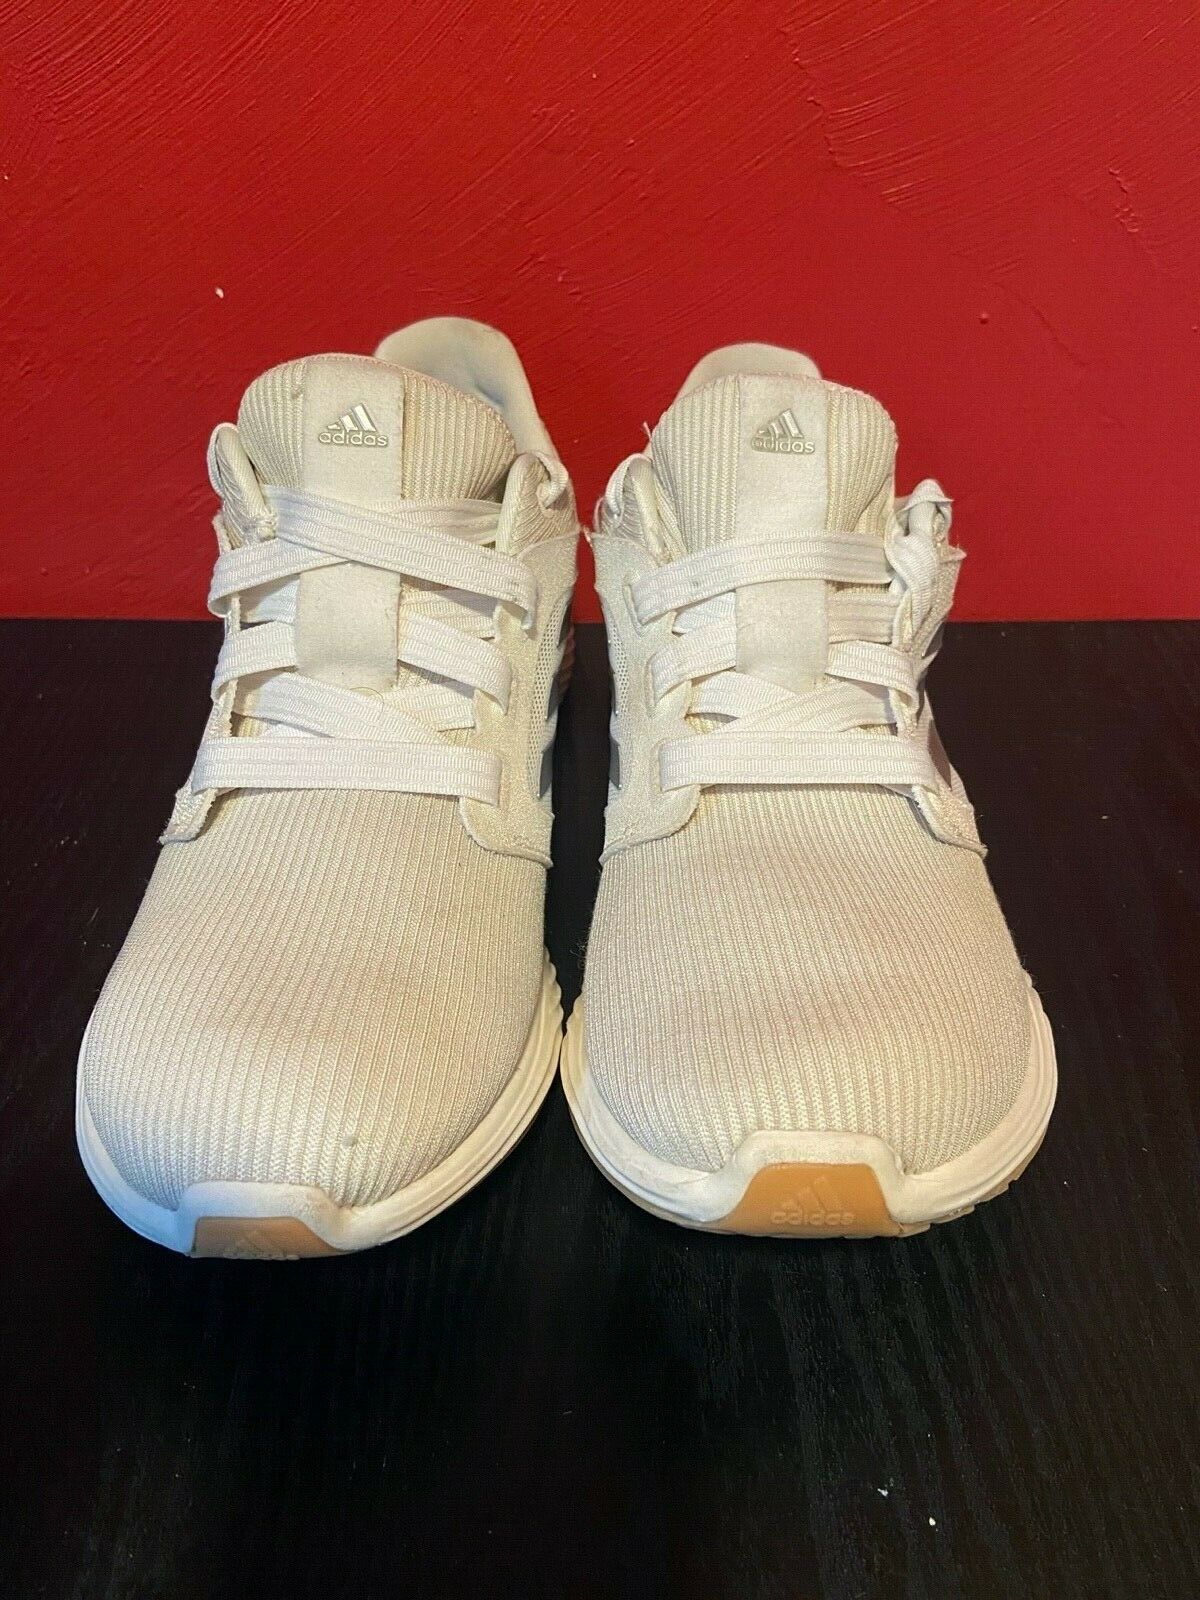 ADIDAS EDGE LUX SHOES WOMENS SIZE 10.5